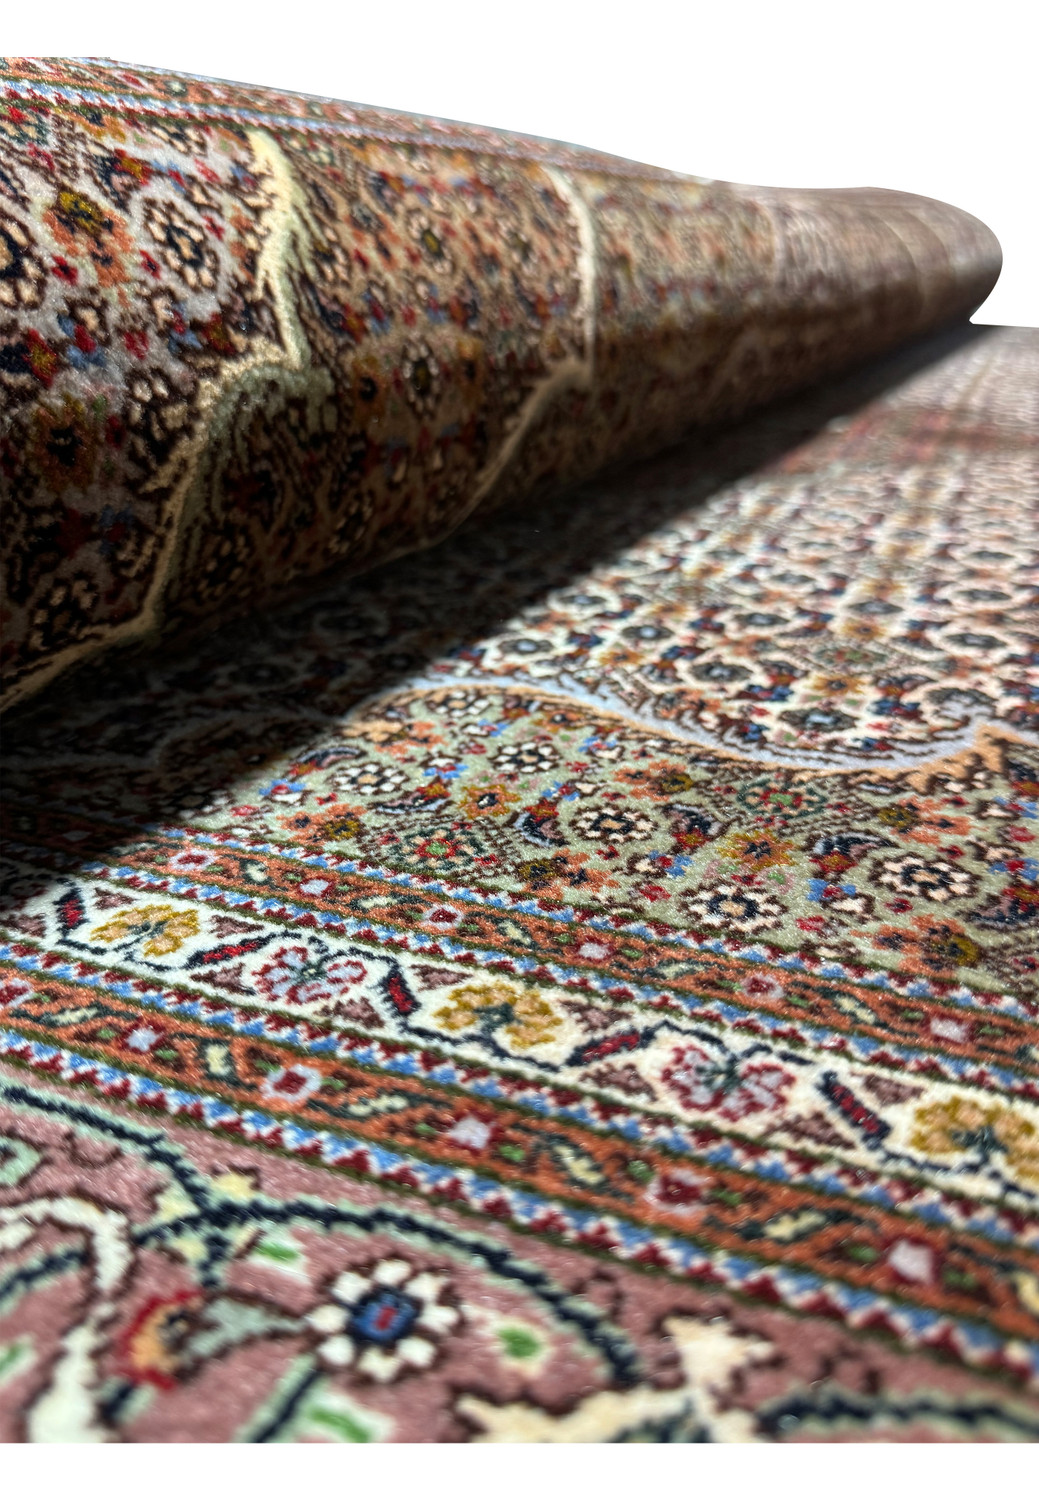 Perspective view of a rolled 5x7 Persian Tabriz Mahi rug, highlighting the tight weave and plush pile, with intricate patterns peeking from the inner layers.